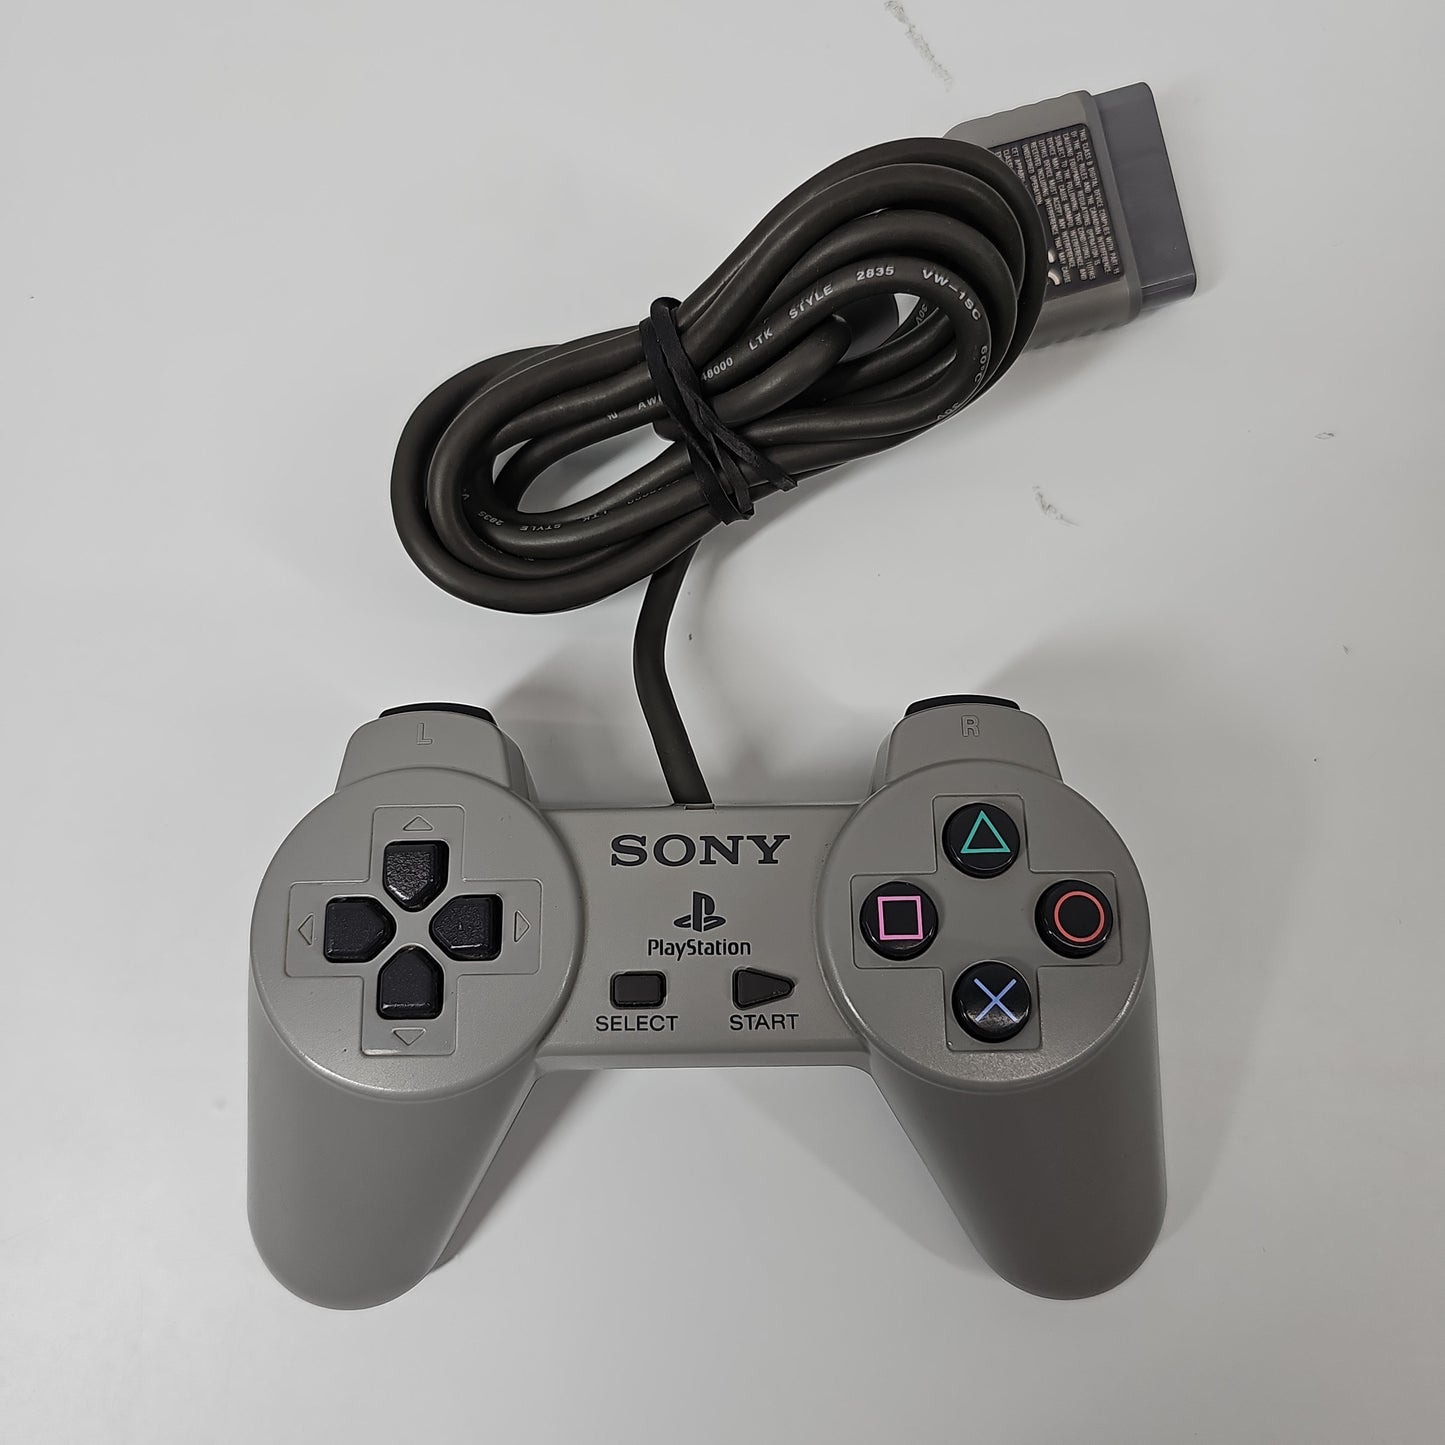 Sony PlayStation 1 PS1 Gray Console Gaming System SCPH-9001